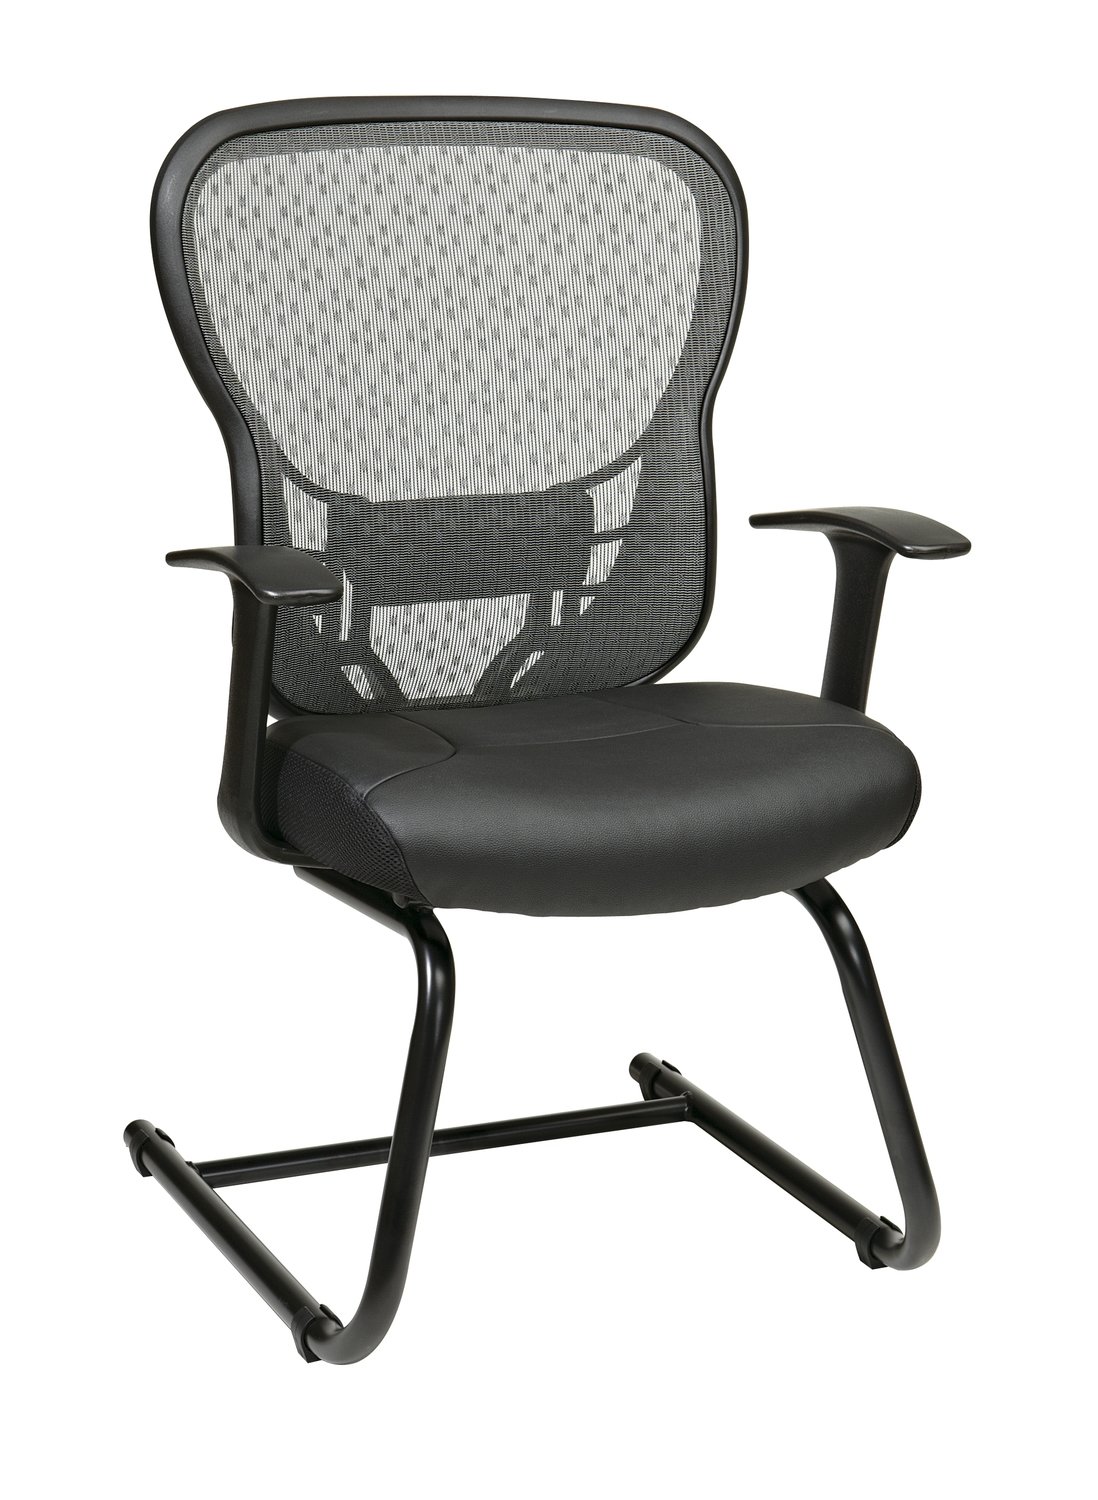 DELUXE R2 SPACEGRID BACK VISITORS CHAIR